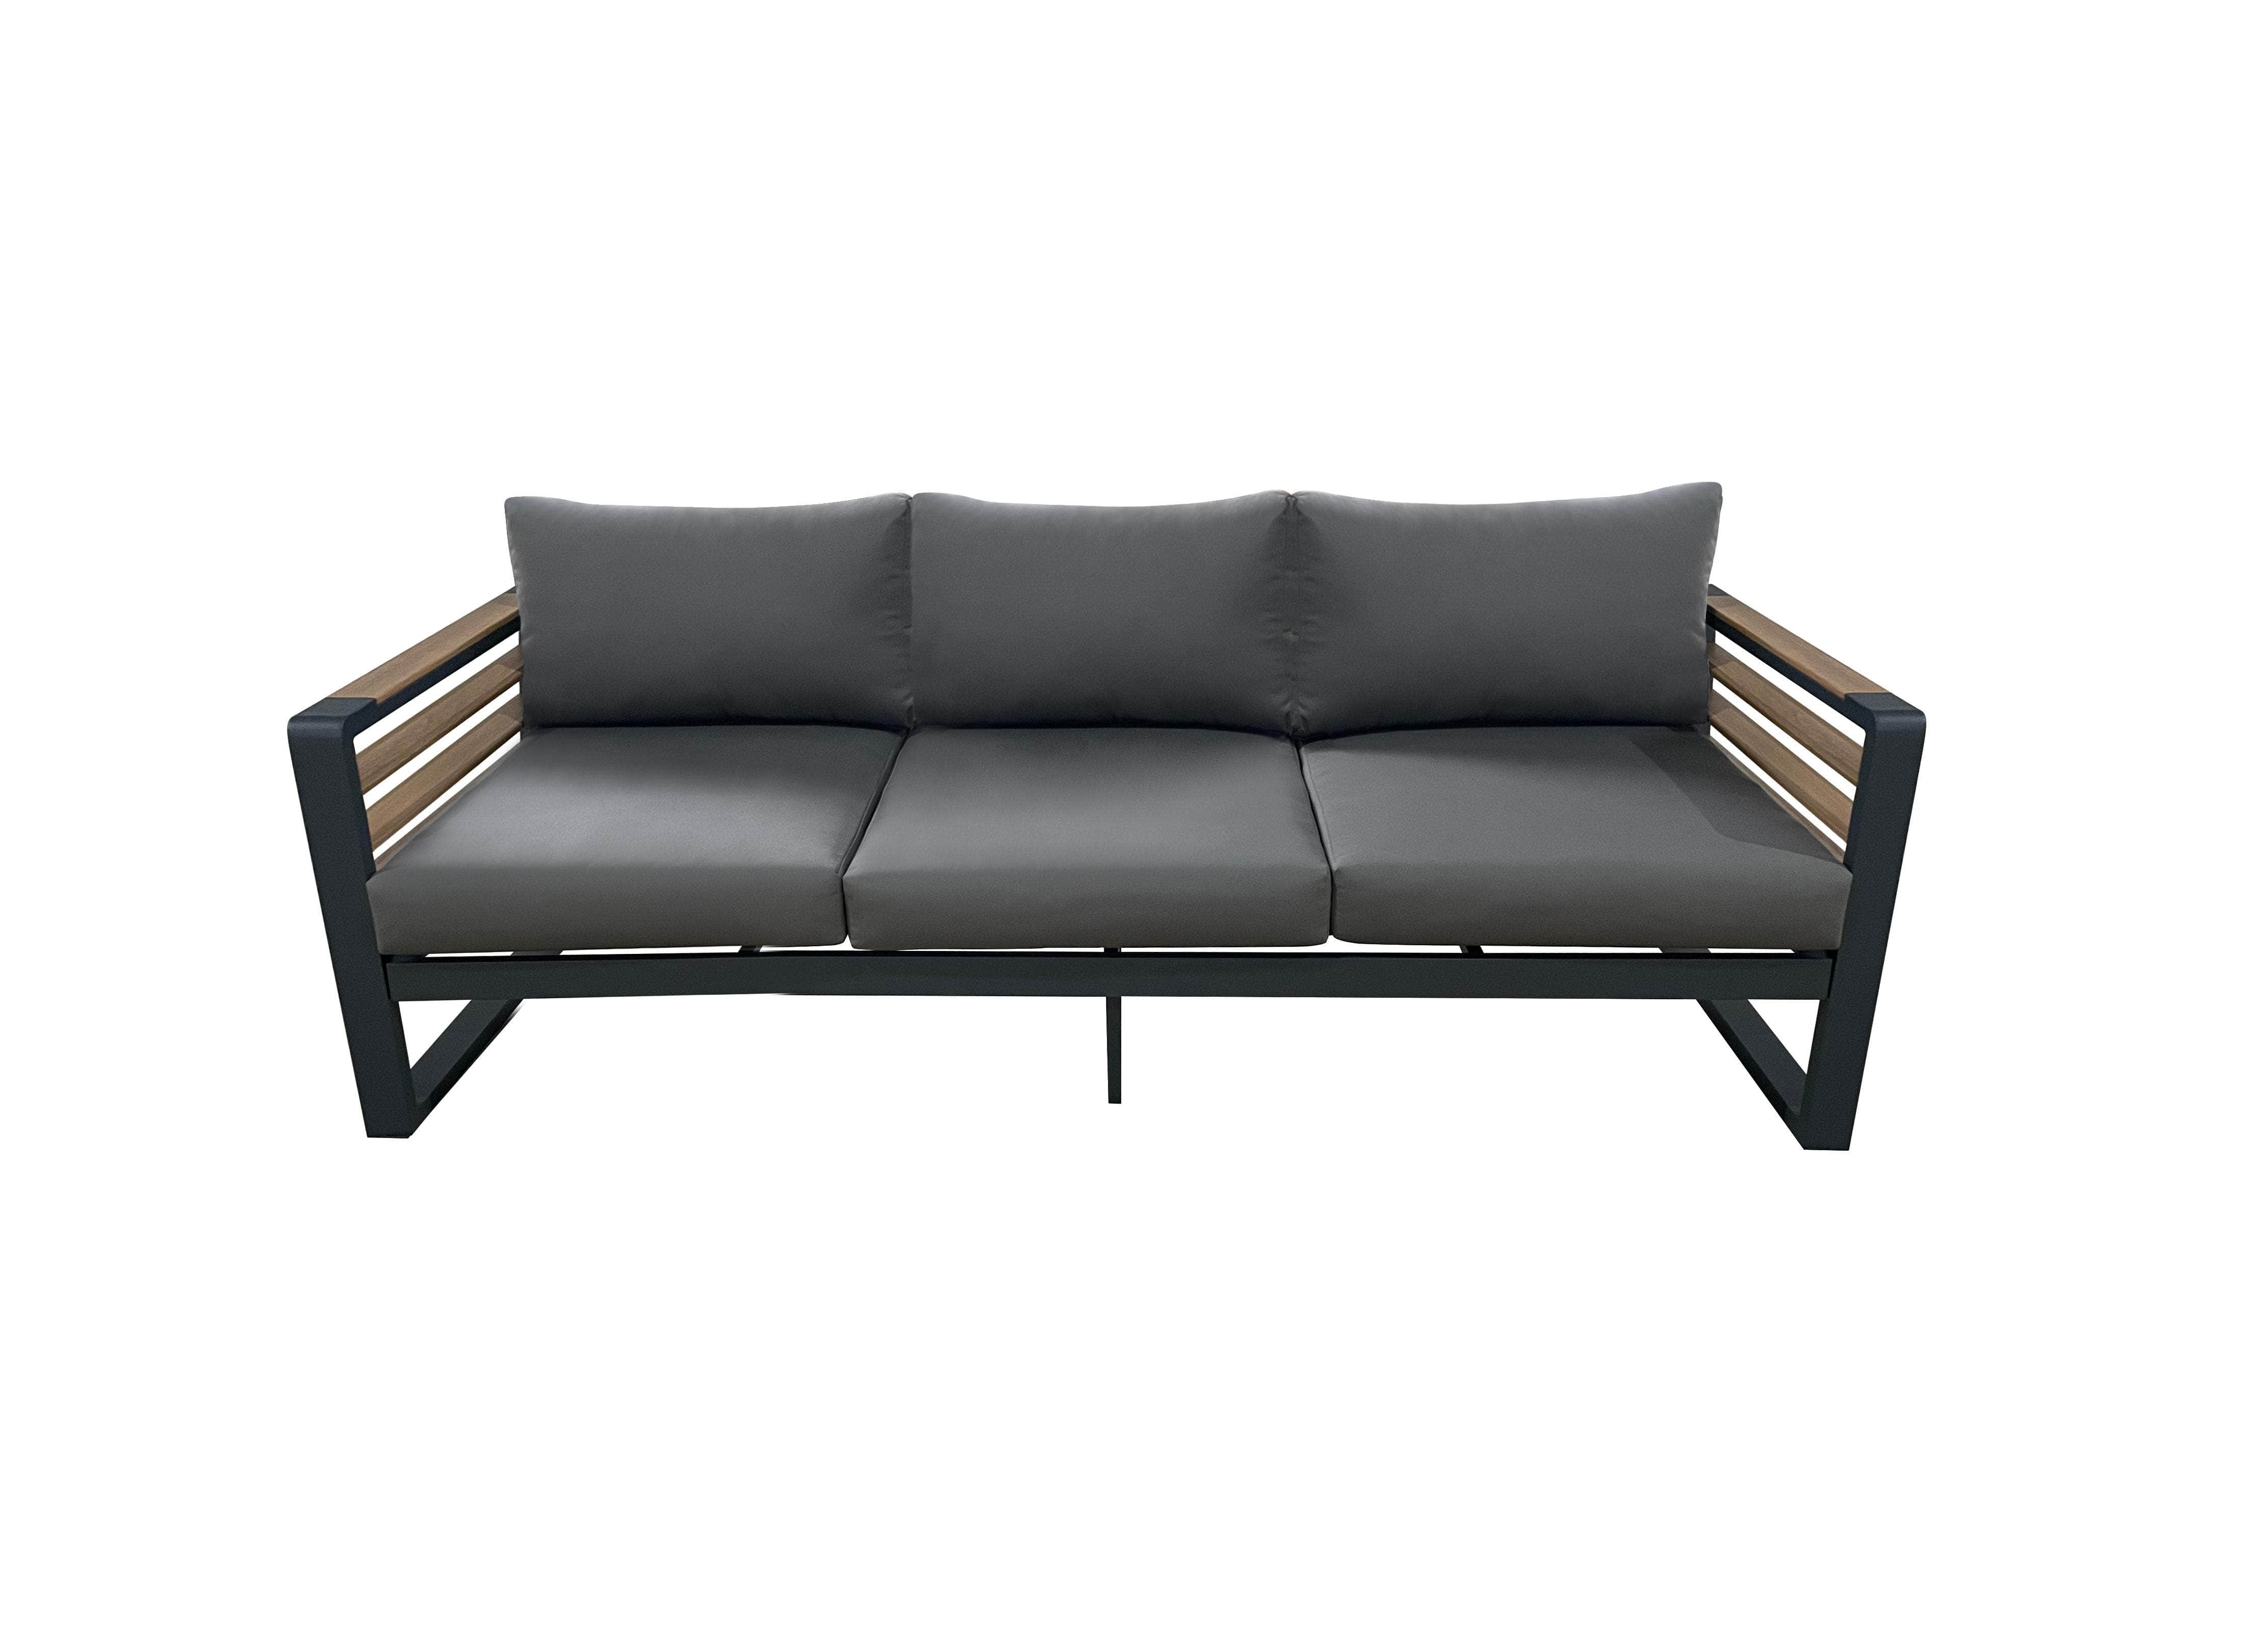 CIEUX Sofa Canvas Charcoal Avignon Outdoor Patio Aluminum Metal Sofa in Black with Sunbrella Cushions - Available in 2 Colours